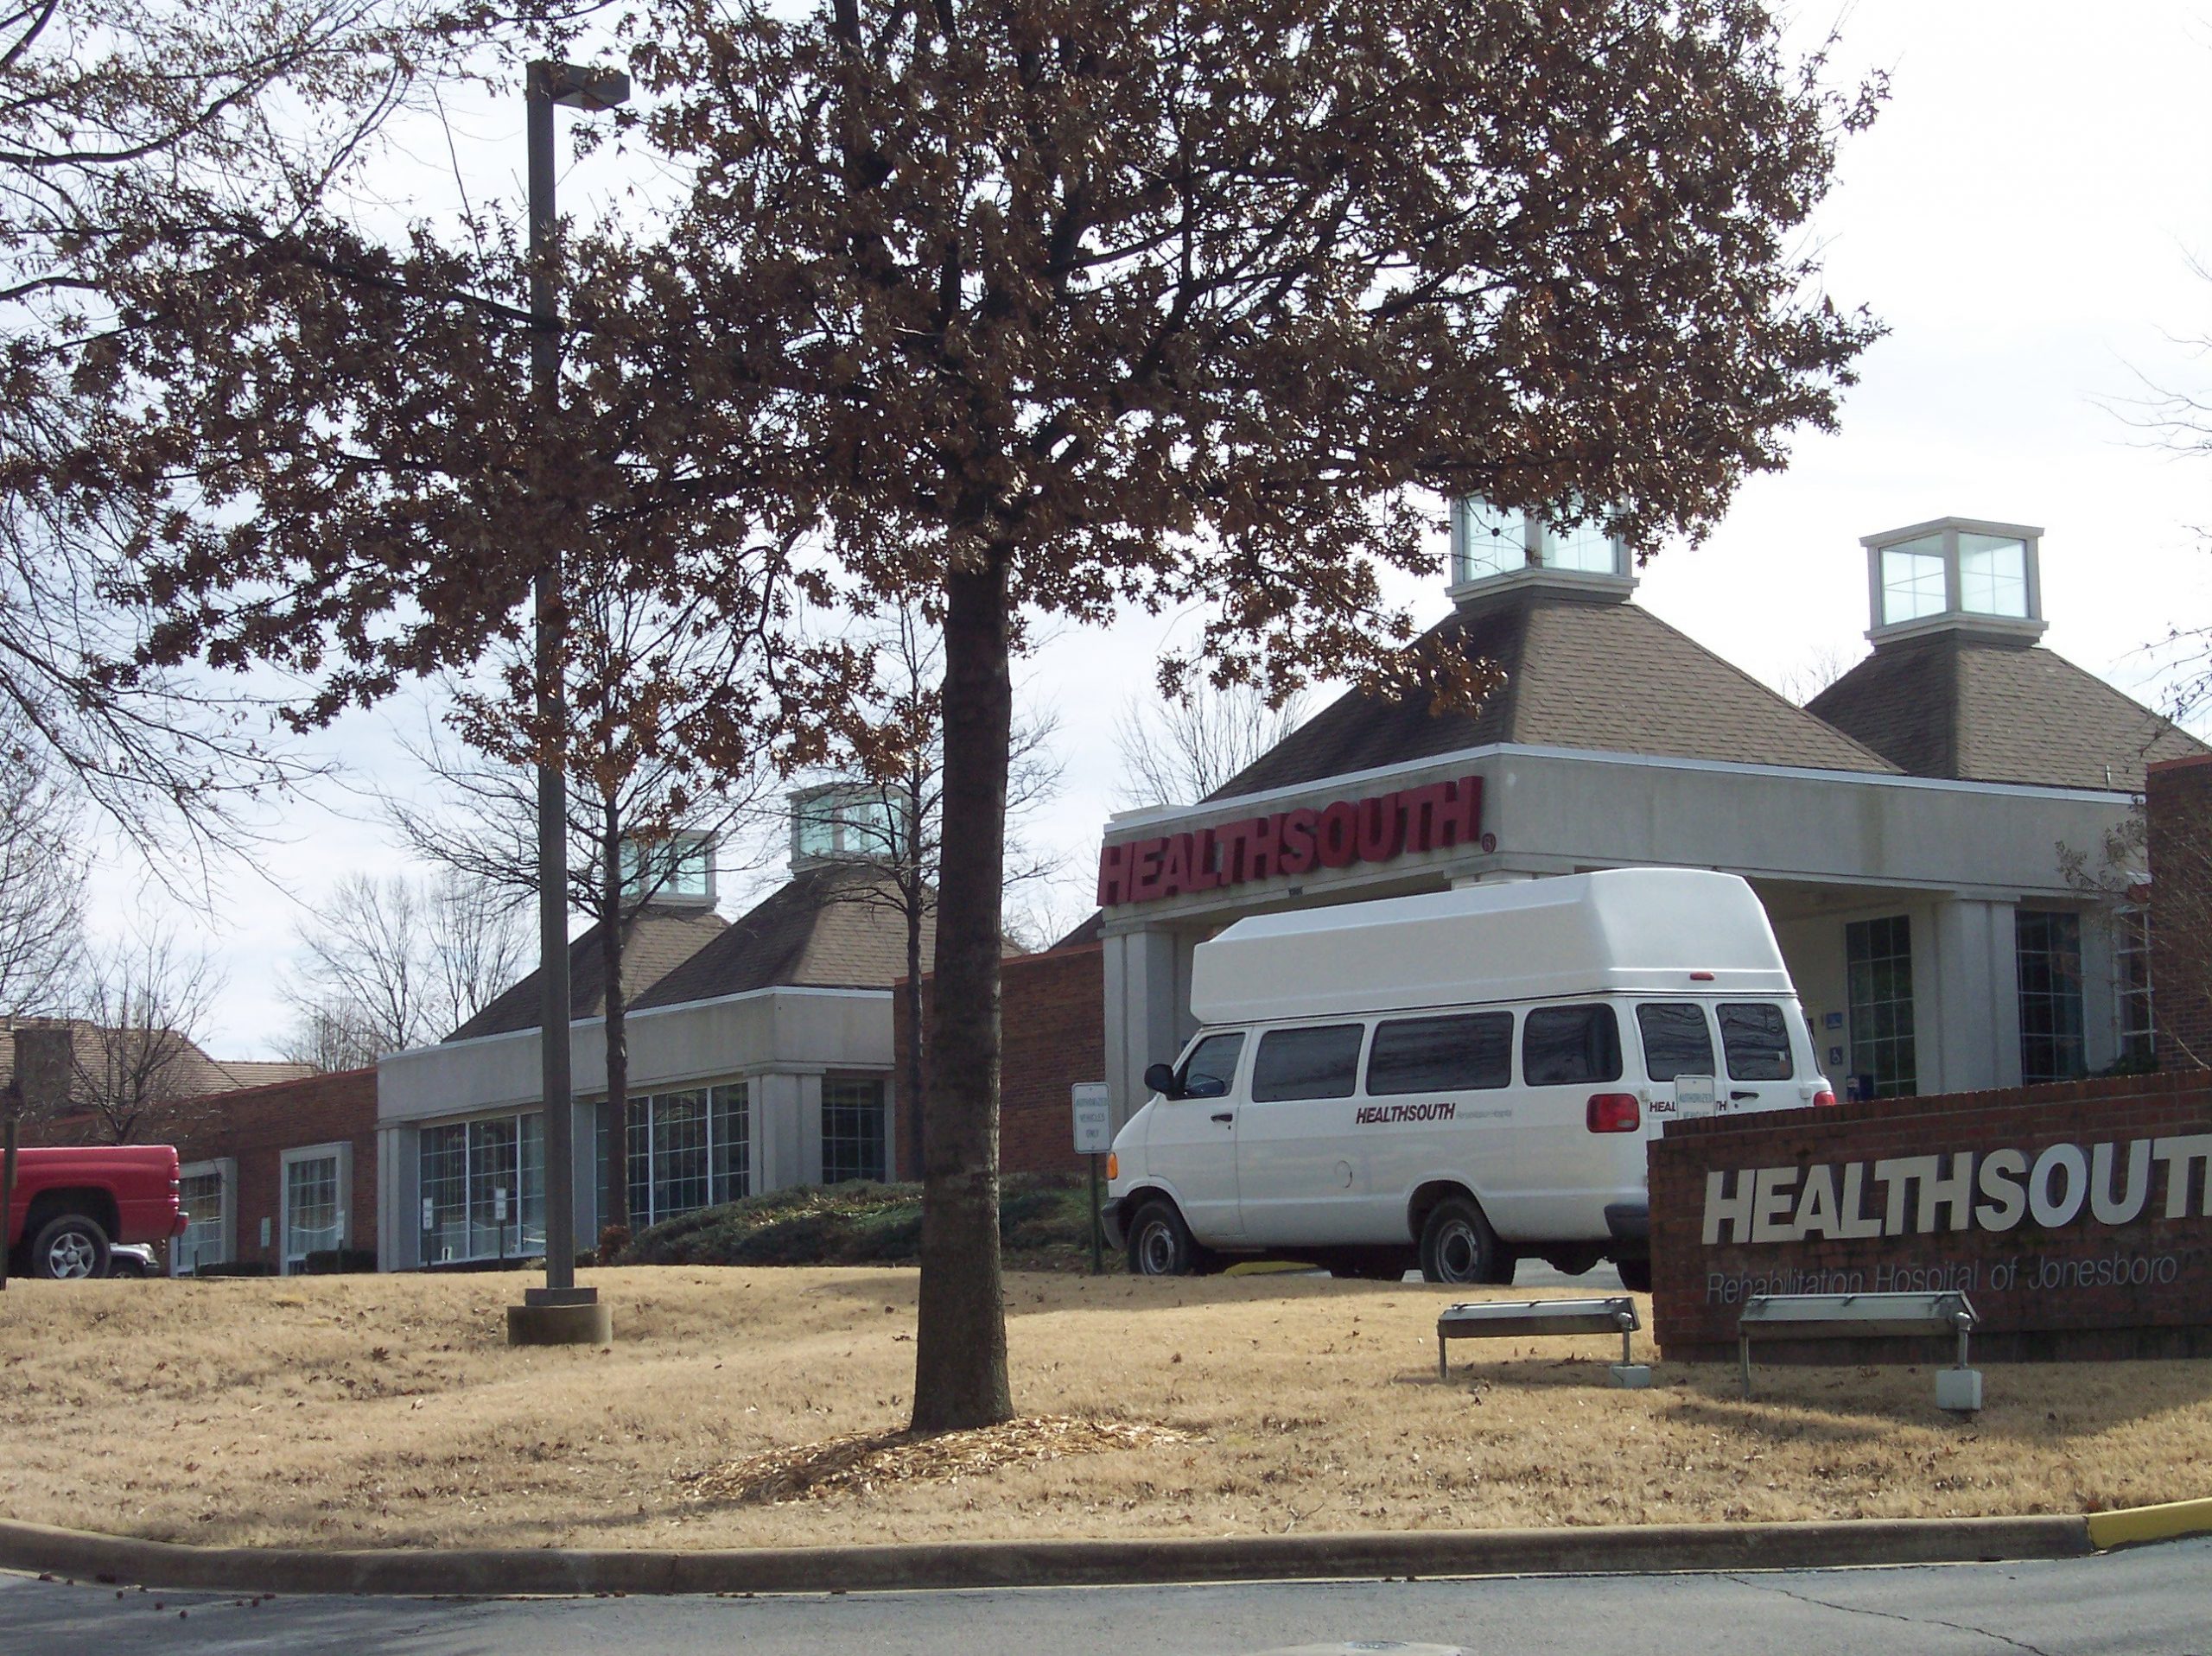 Healthsouth Hospital Building and Bus